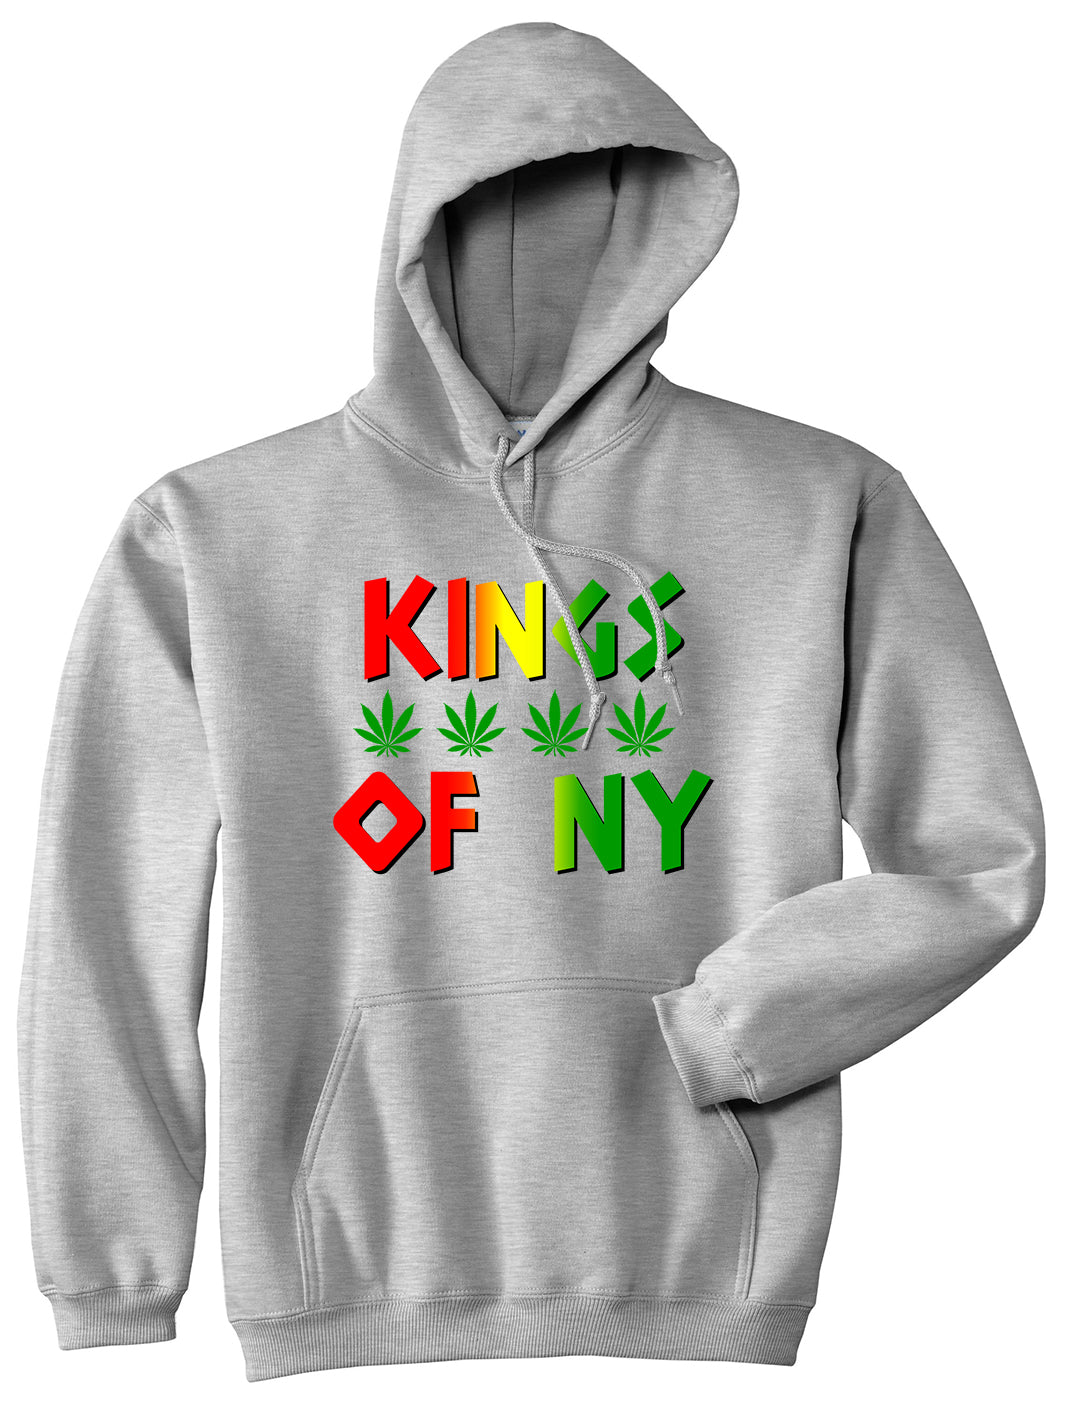 Puff Puff Pass Mens Pullover Hoodie Grey by Kings Of NY